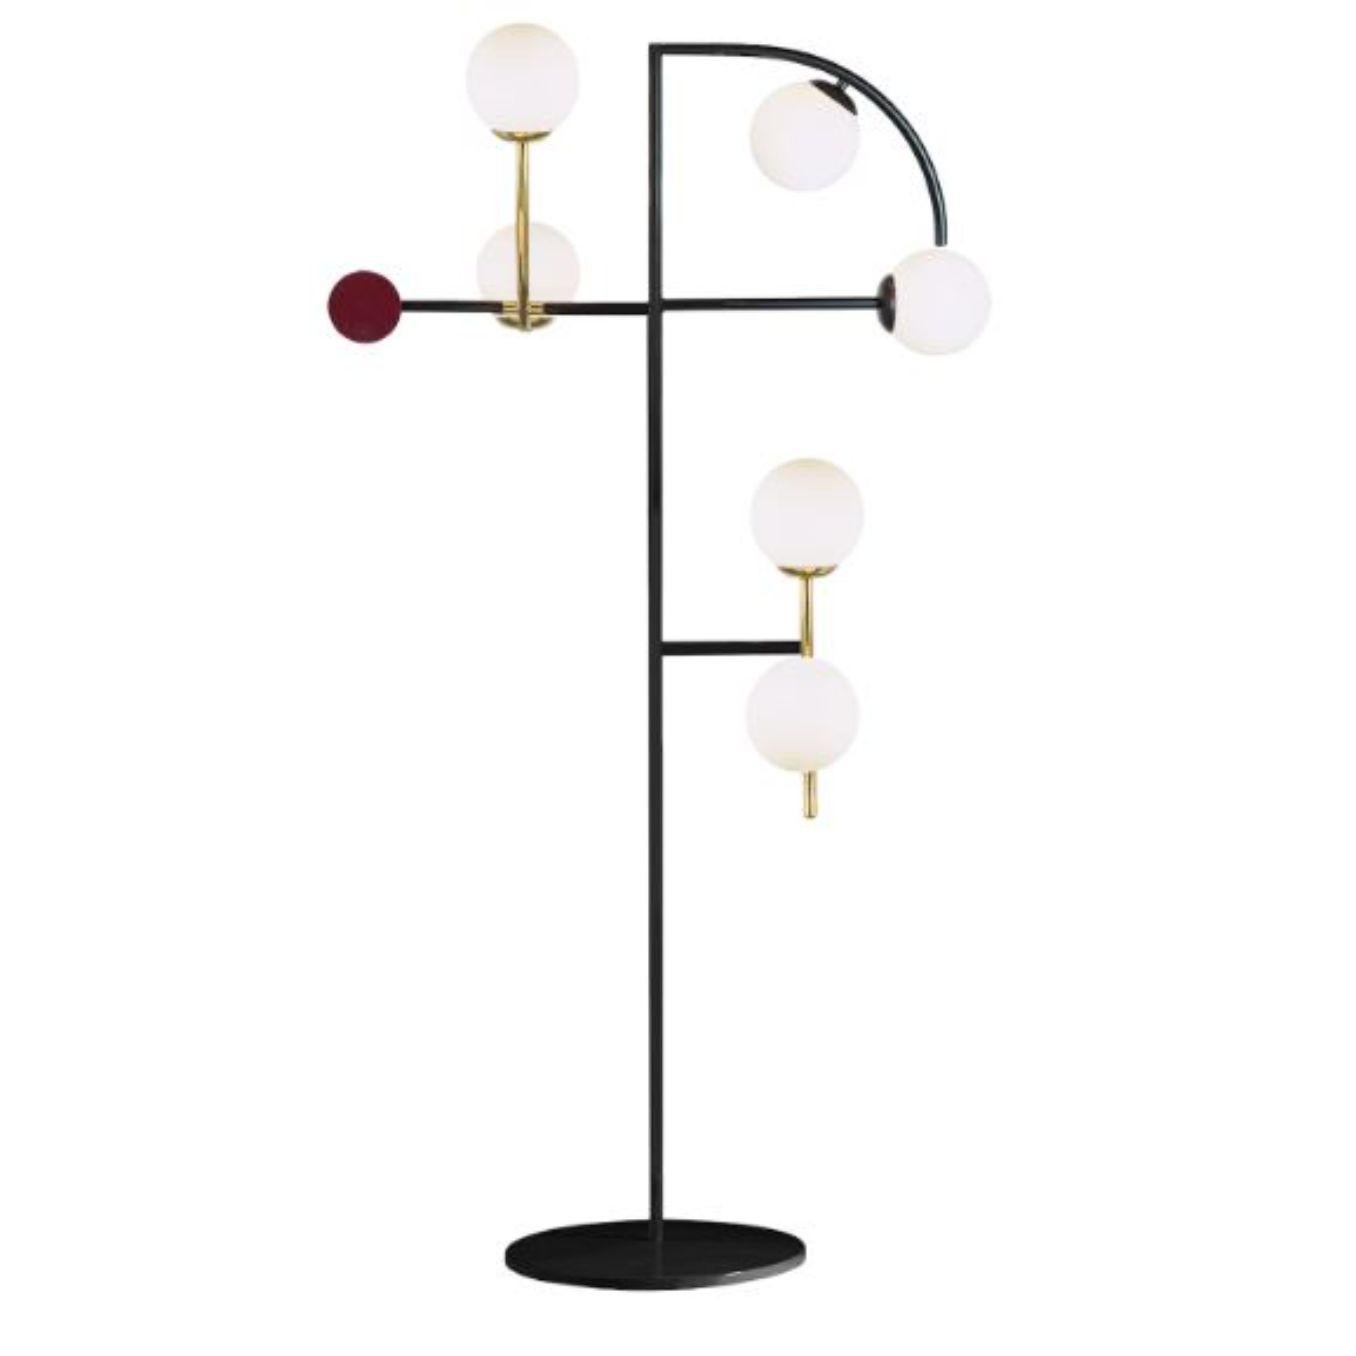 Portuguese Copper Helio Floor Lamp by Dooq For Sale